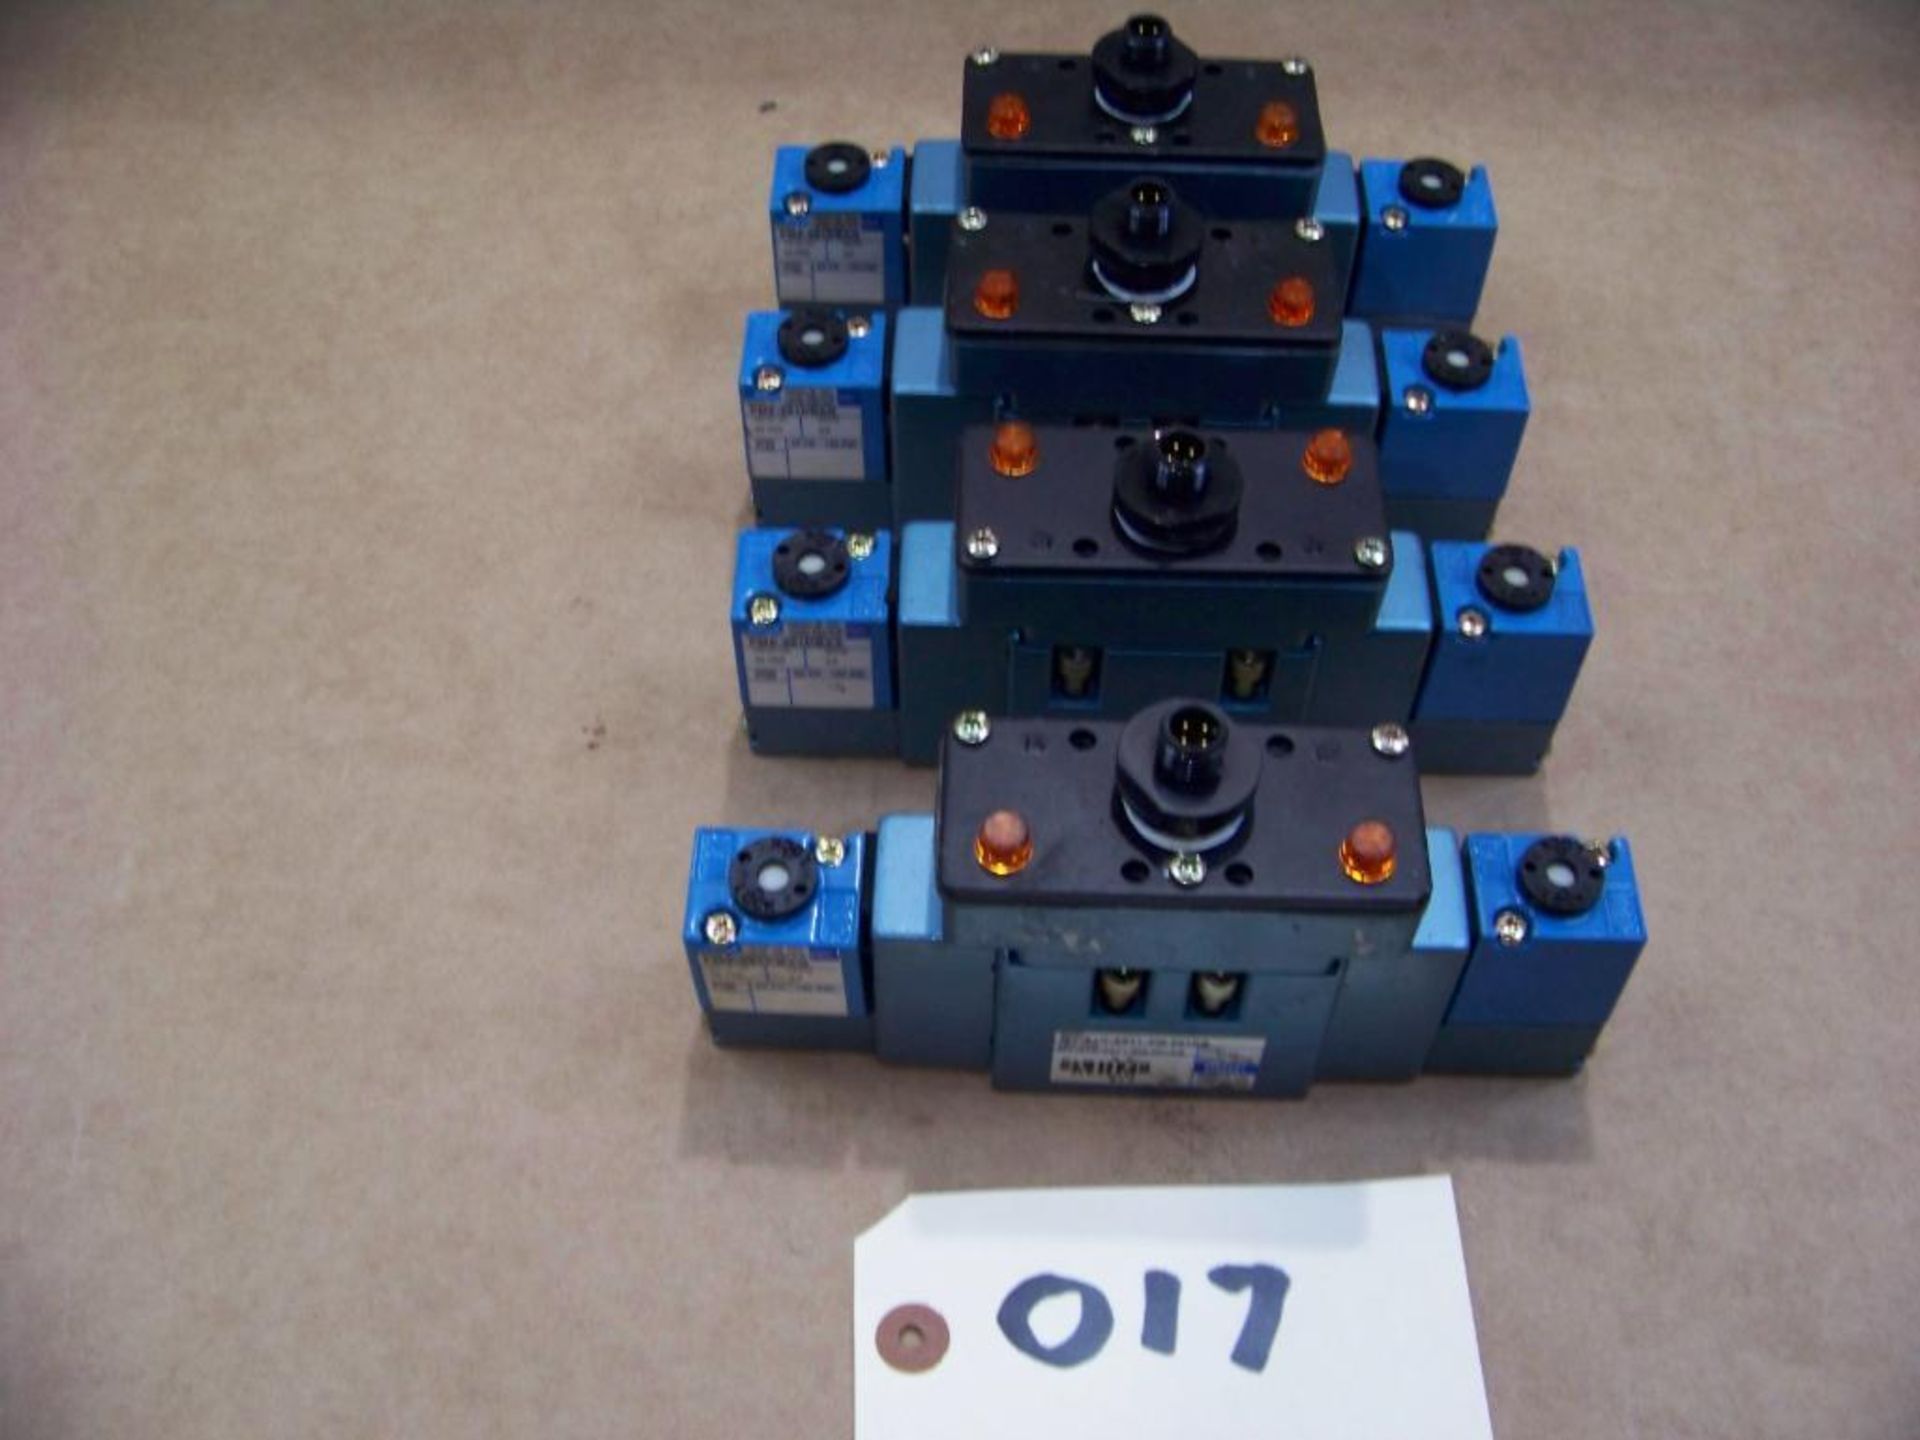 4 - MAC VALVES #MY-A1C-A211 WITH MPE 591 SOLENOIDS